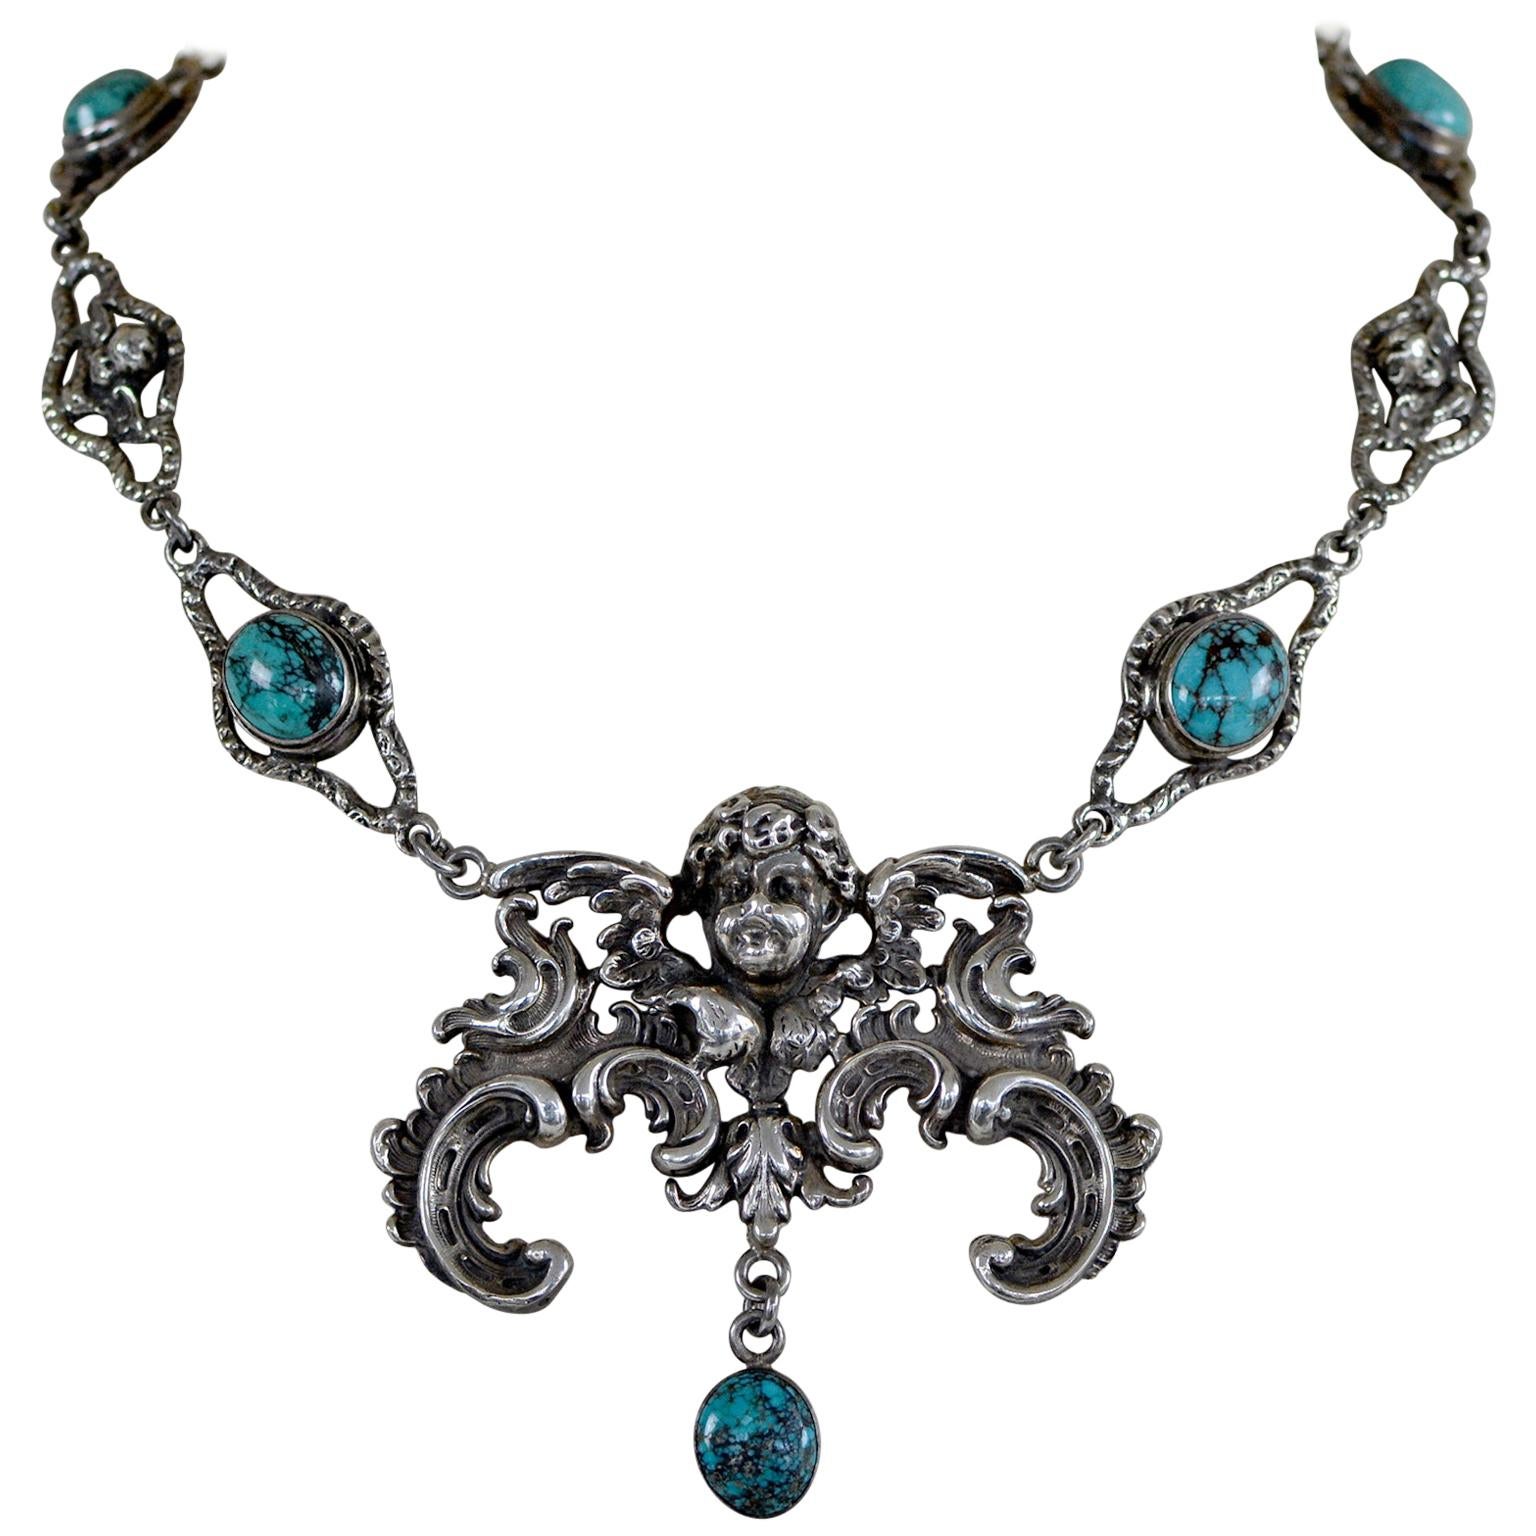 Jill Garber Divine Baroque Figural Angel Drop Necklace with Turquoise Cabochons